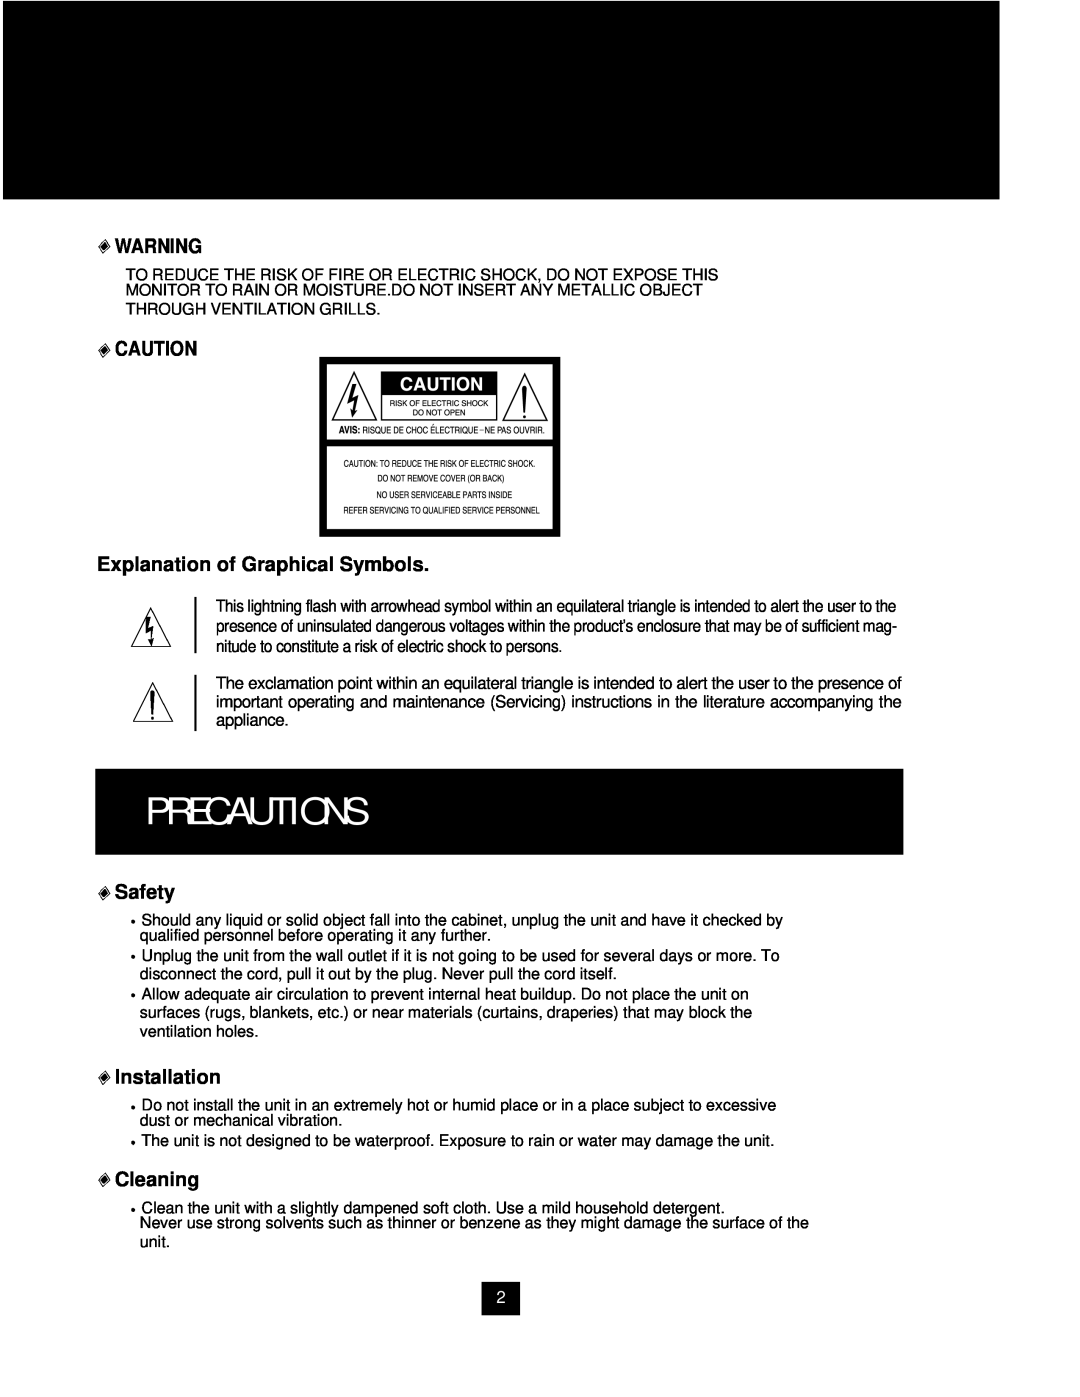 Samsung SAM-14MV manual Explanation of Graphical Symbols, Safety, Installation, Cleaning, Precautions 